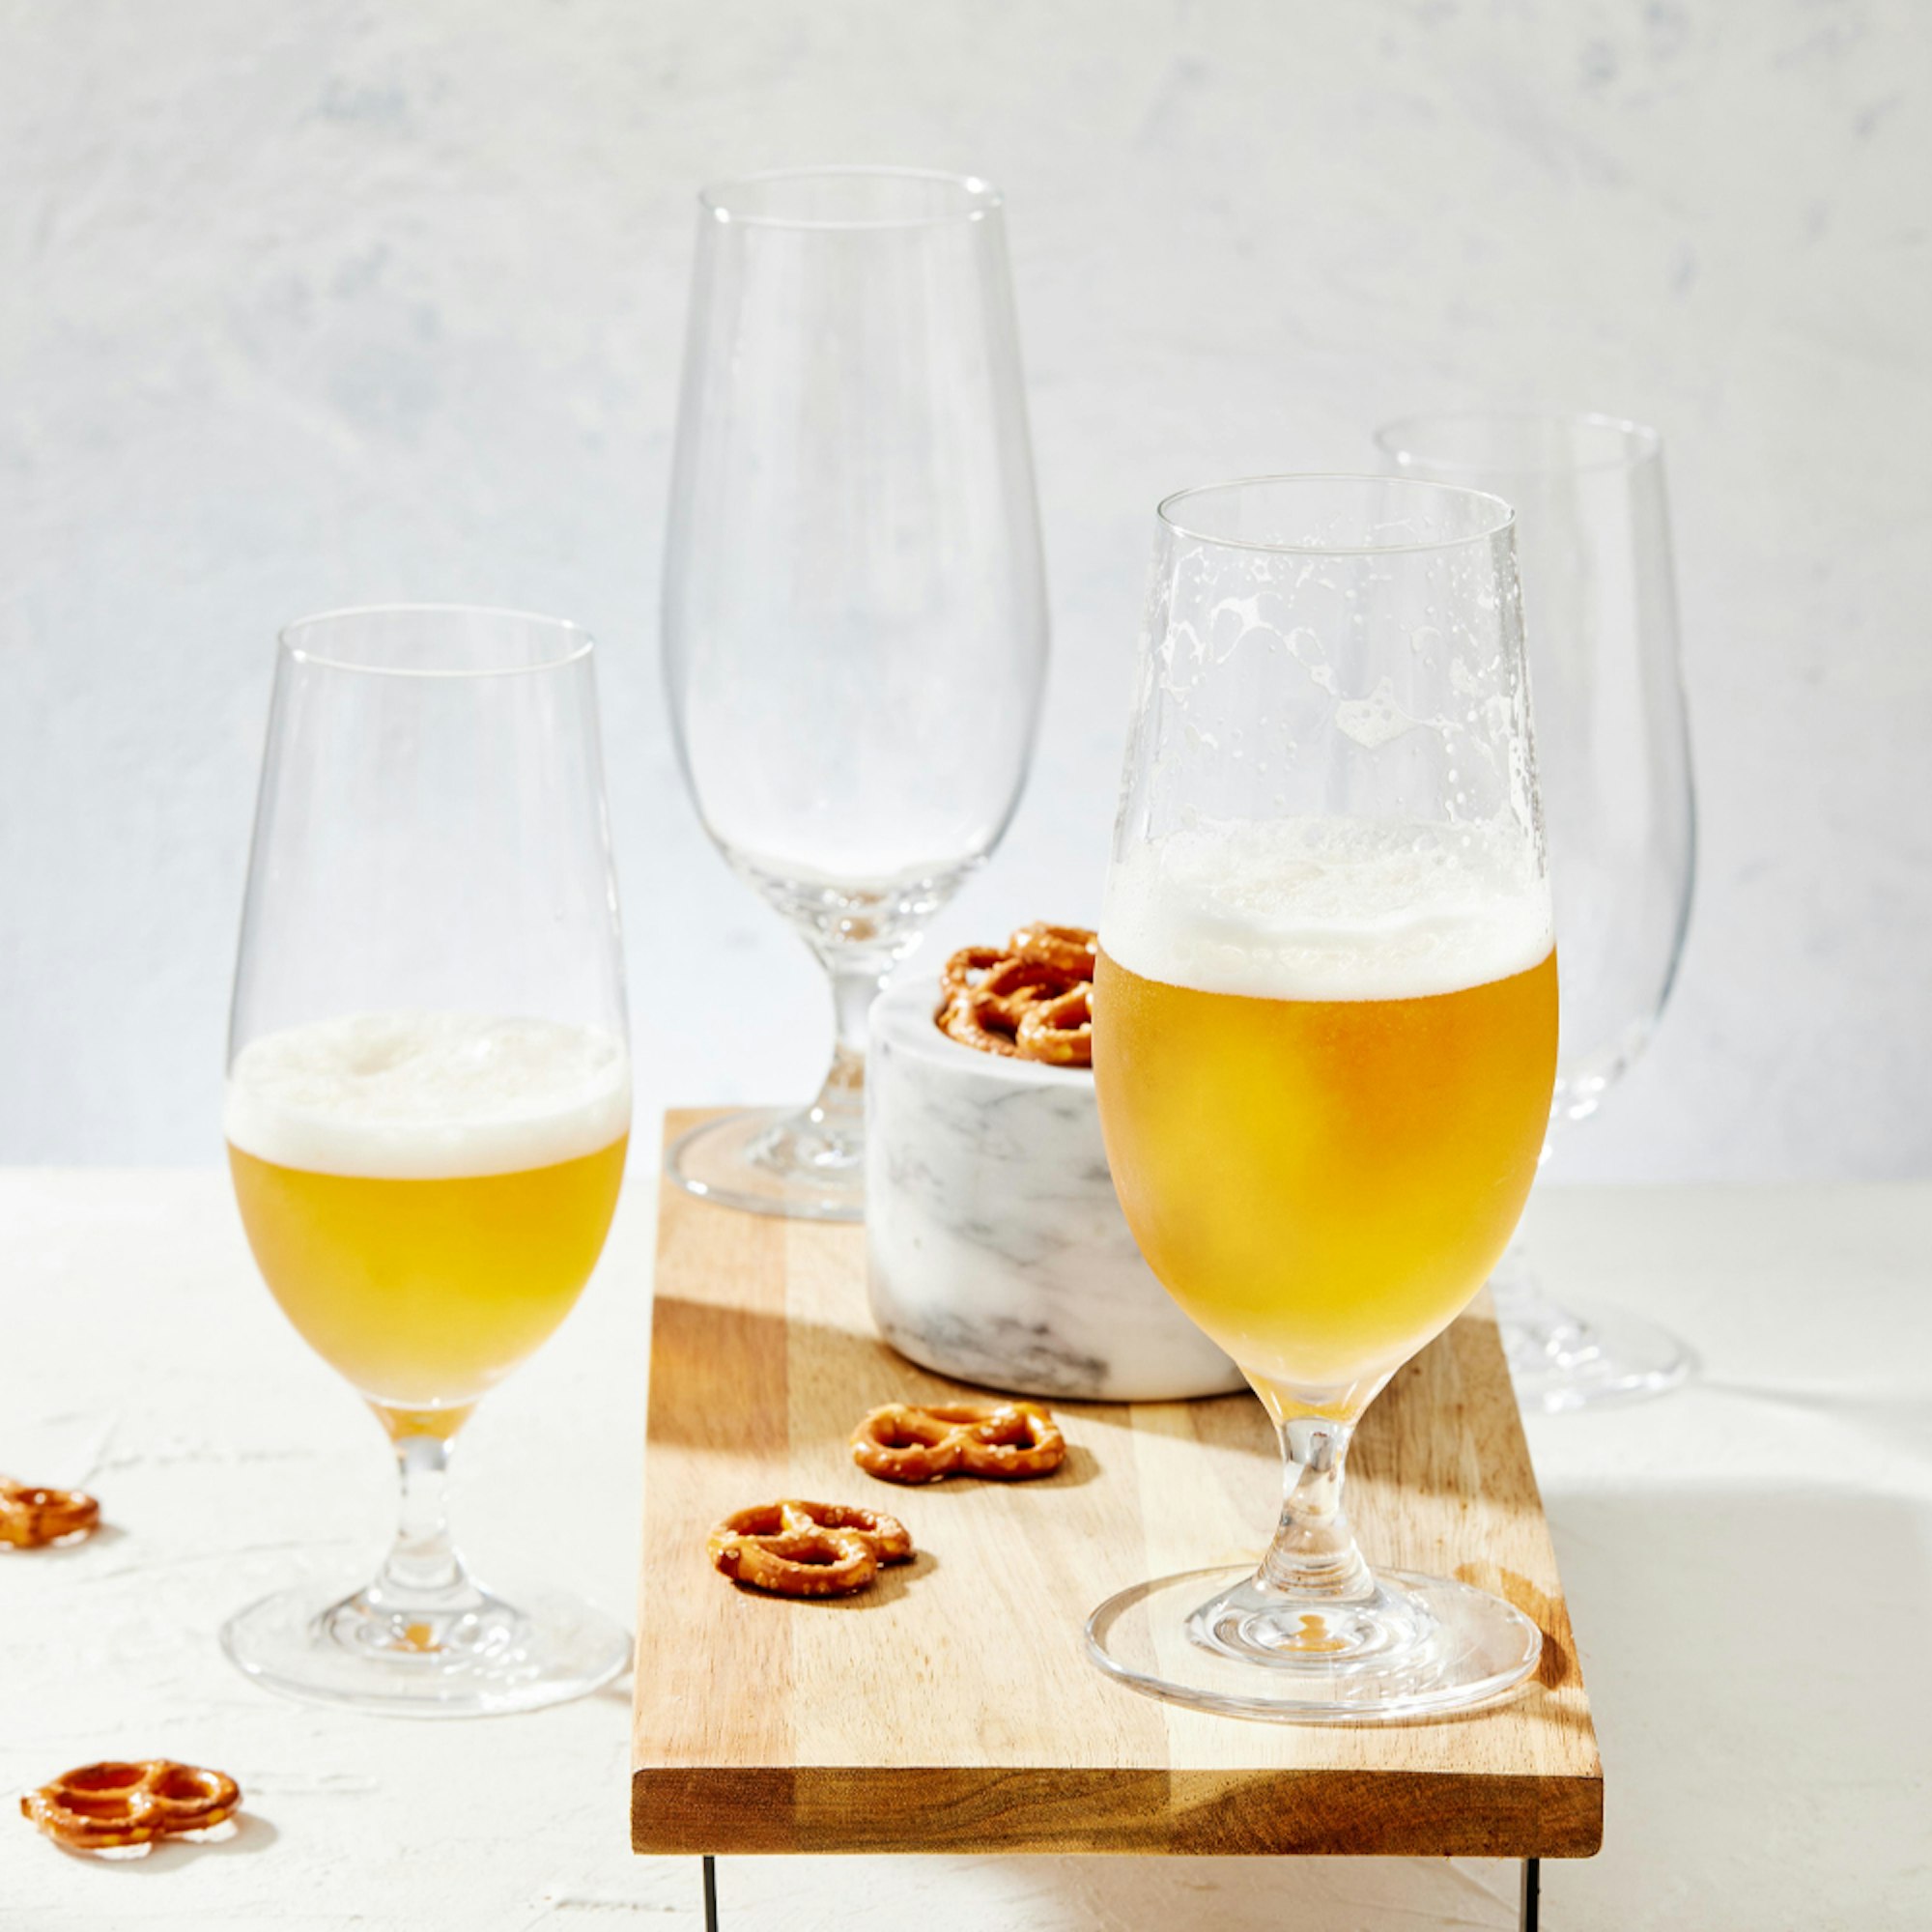 Beer glasses on wooden plank with pretzels